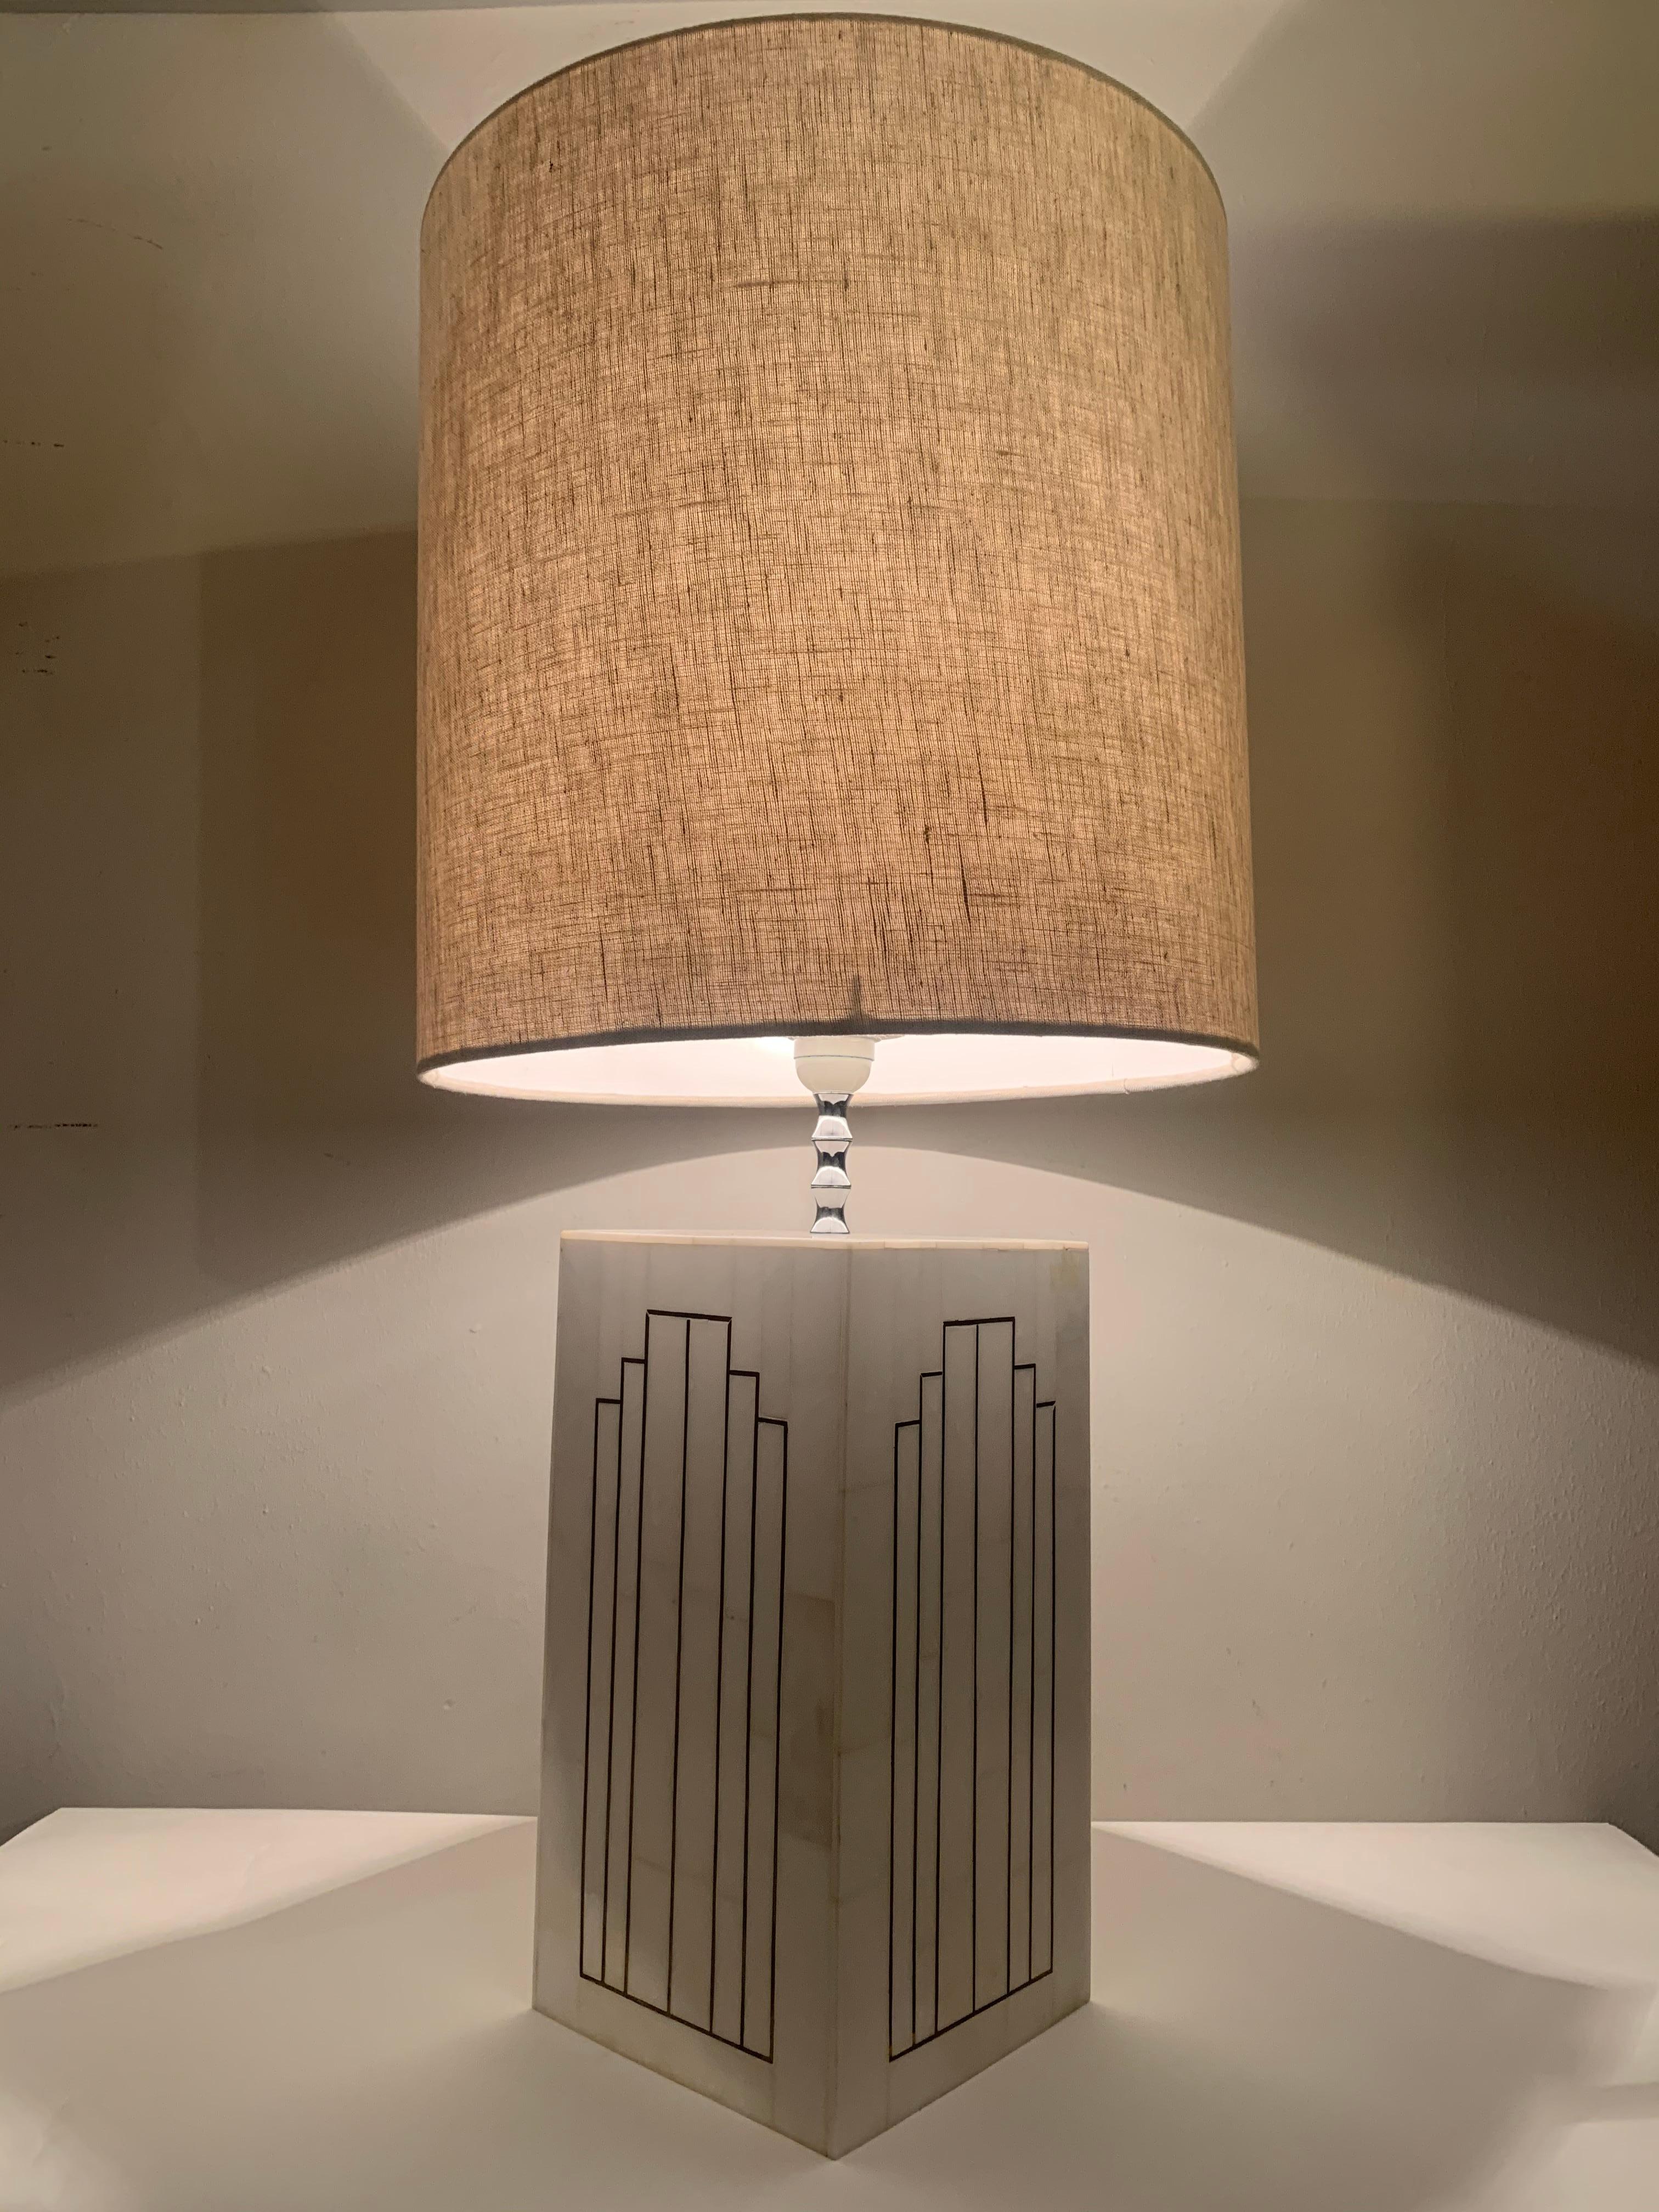 1970s Italian inlaid marble table lamp with an interesting copper geometric Art Deco style inlay. The mosaic marble is laid onto a heavy wooden base with a polished chrome stem and the original plastic bulb fitting. The original wire drum shade has